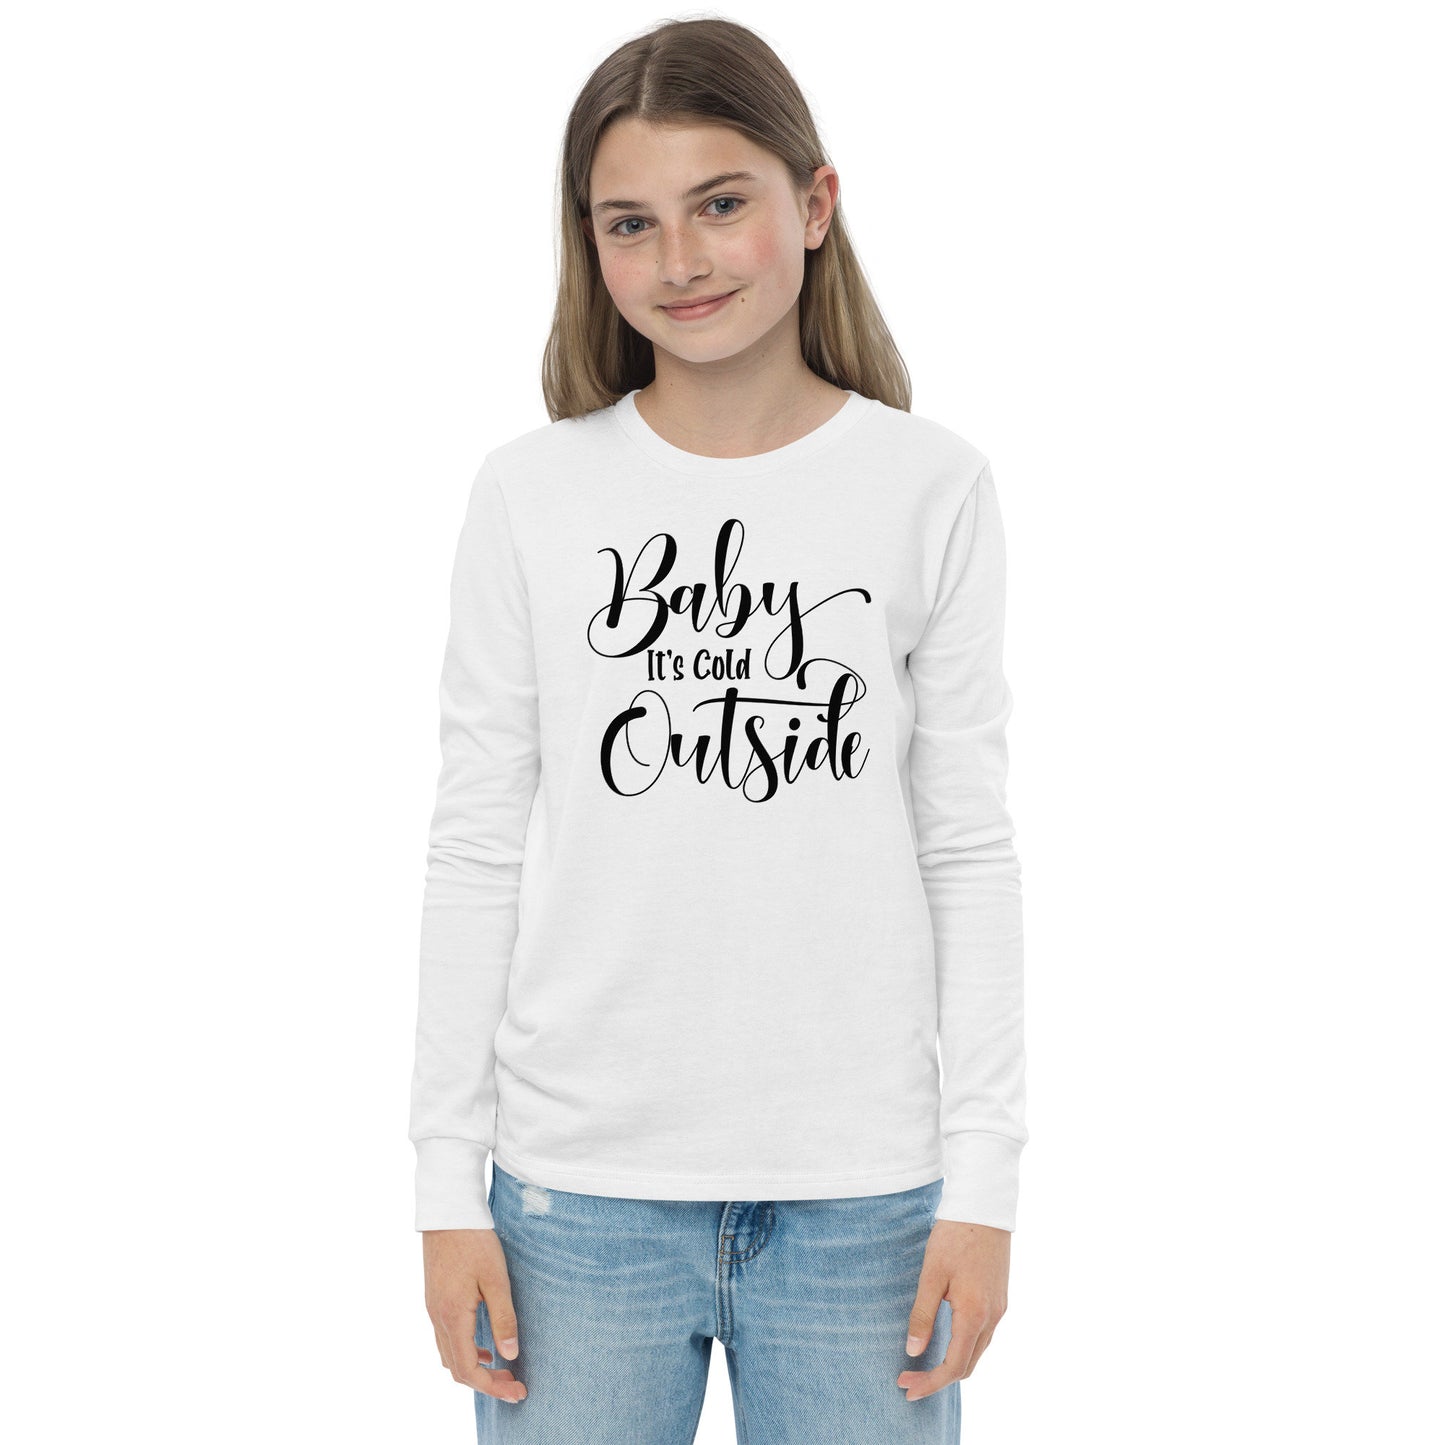 Baby It's Cold Outside - Fun Winter - Cute Winter Words - Youth long sleeve tee